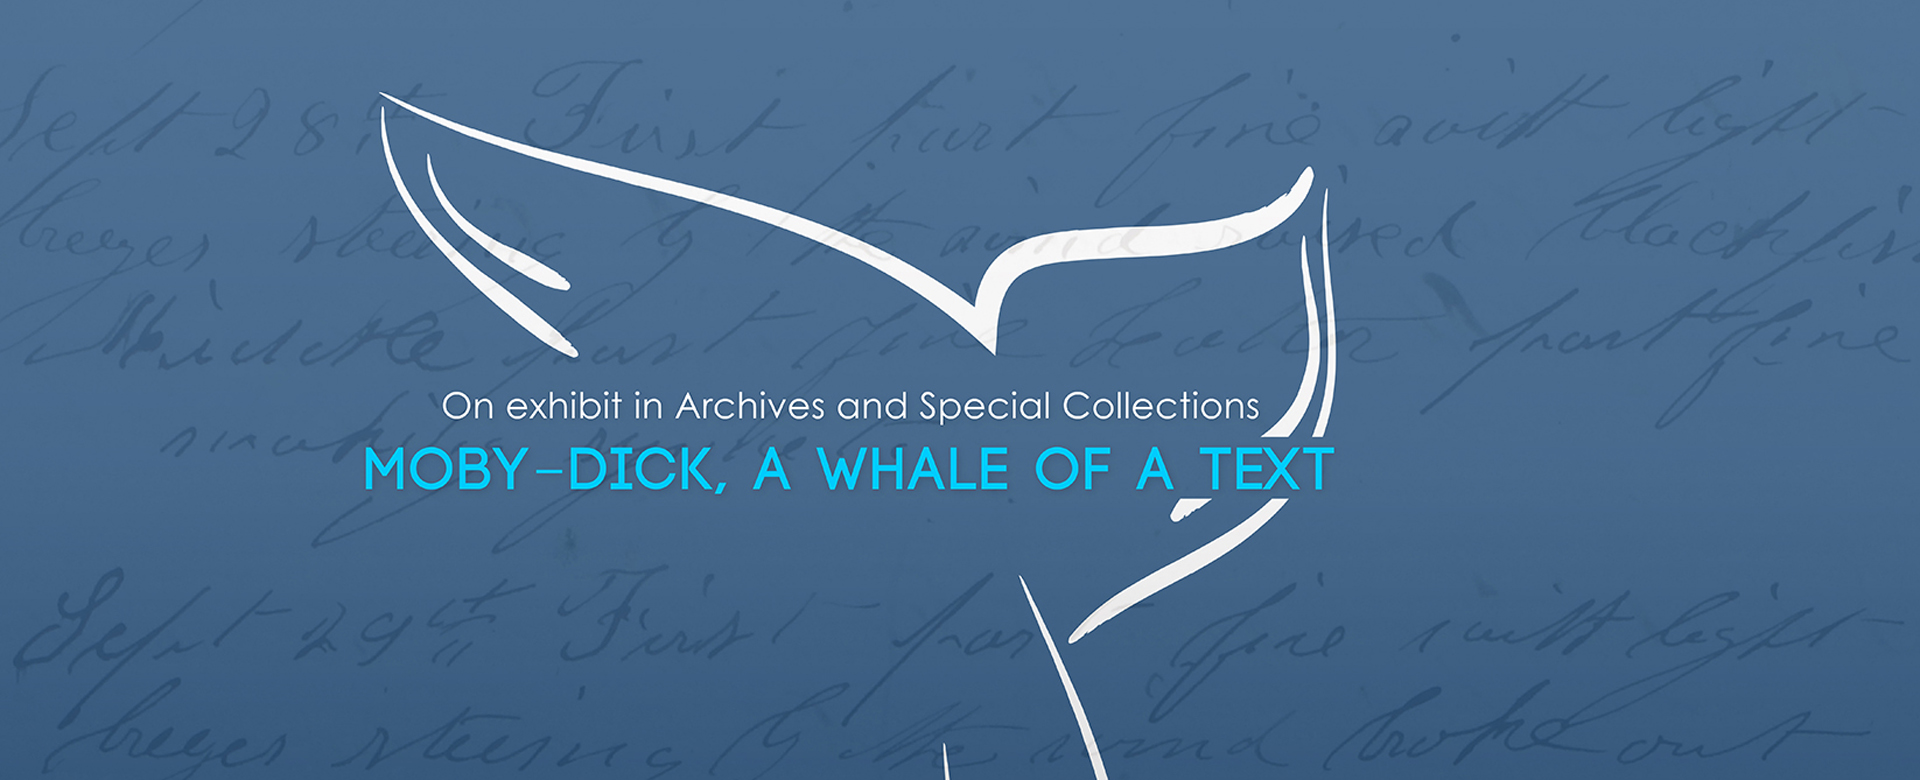 Moby Dick: A Whale of a Text